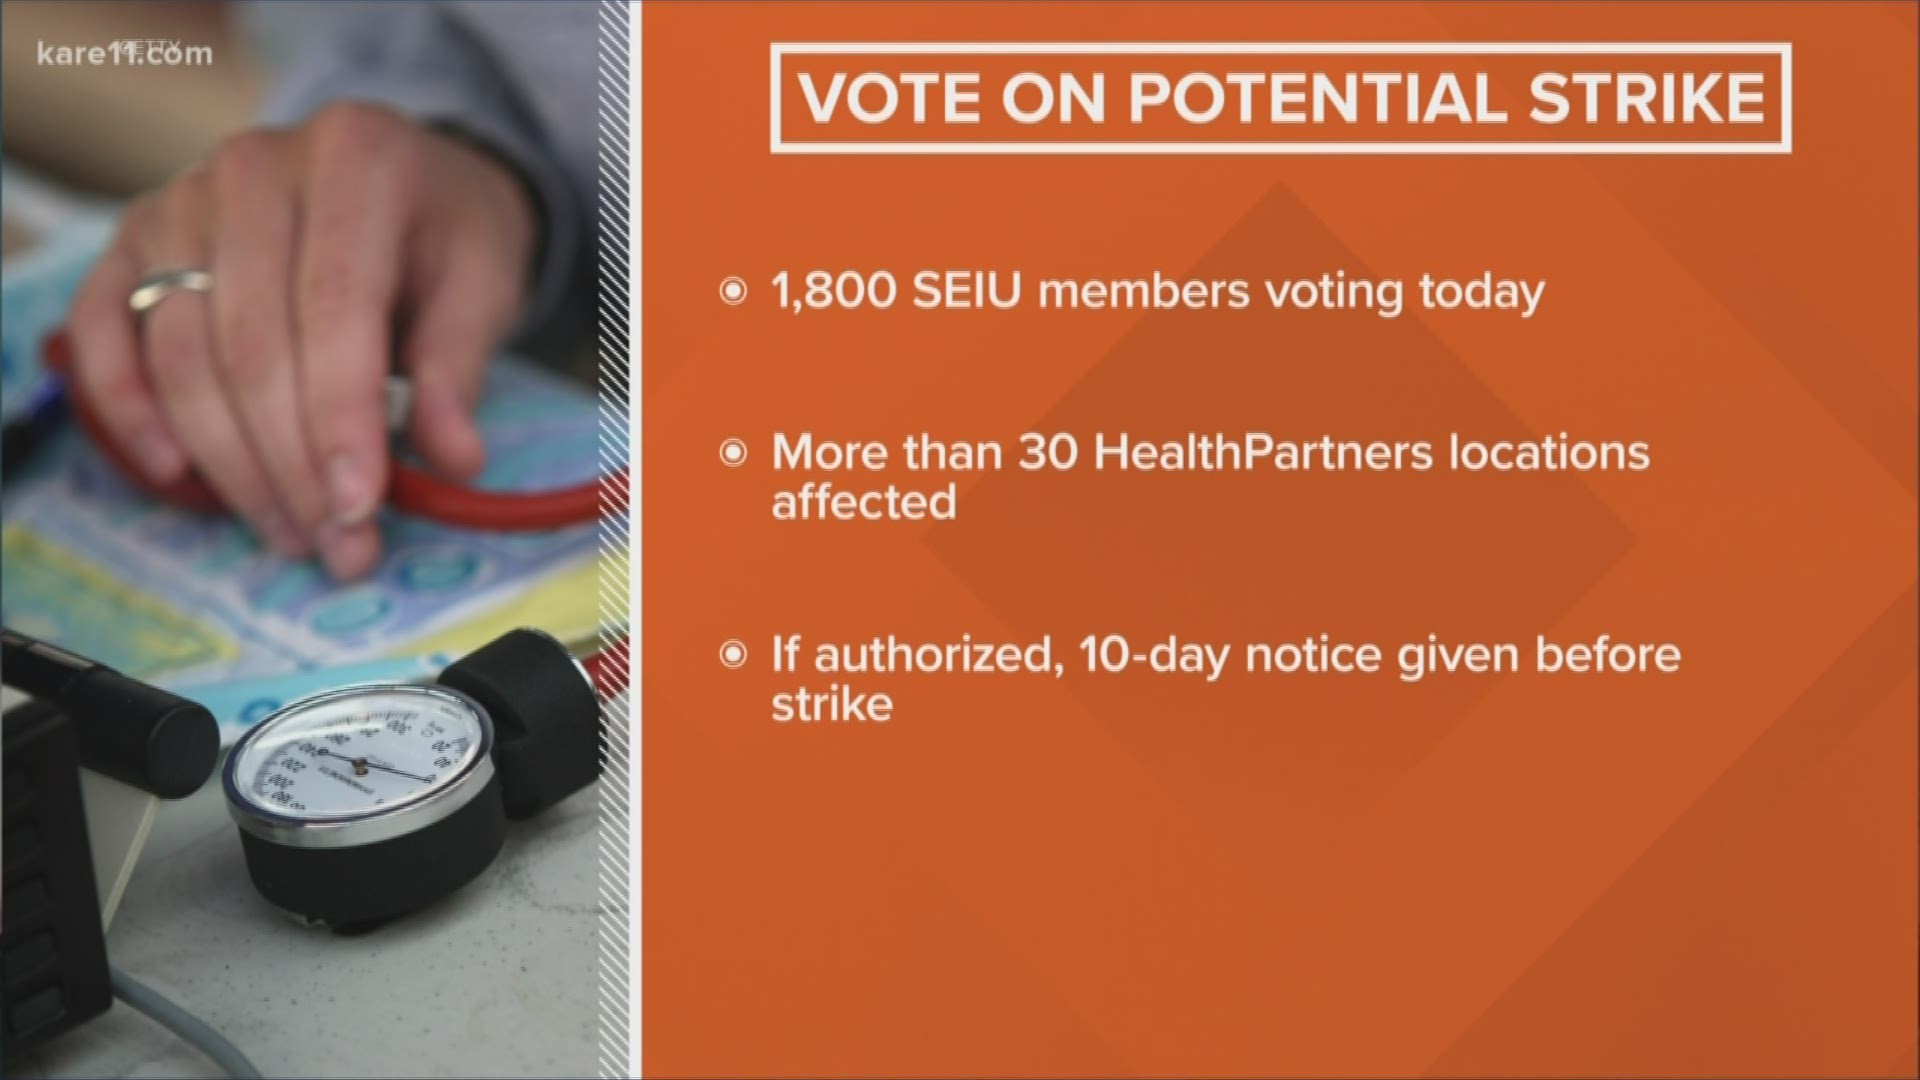 Thursday, workers with SEIU Healthcare Minnesota will vote on whether or not to strike for seven days.